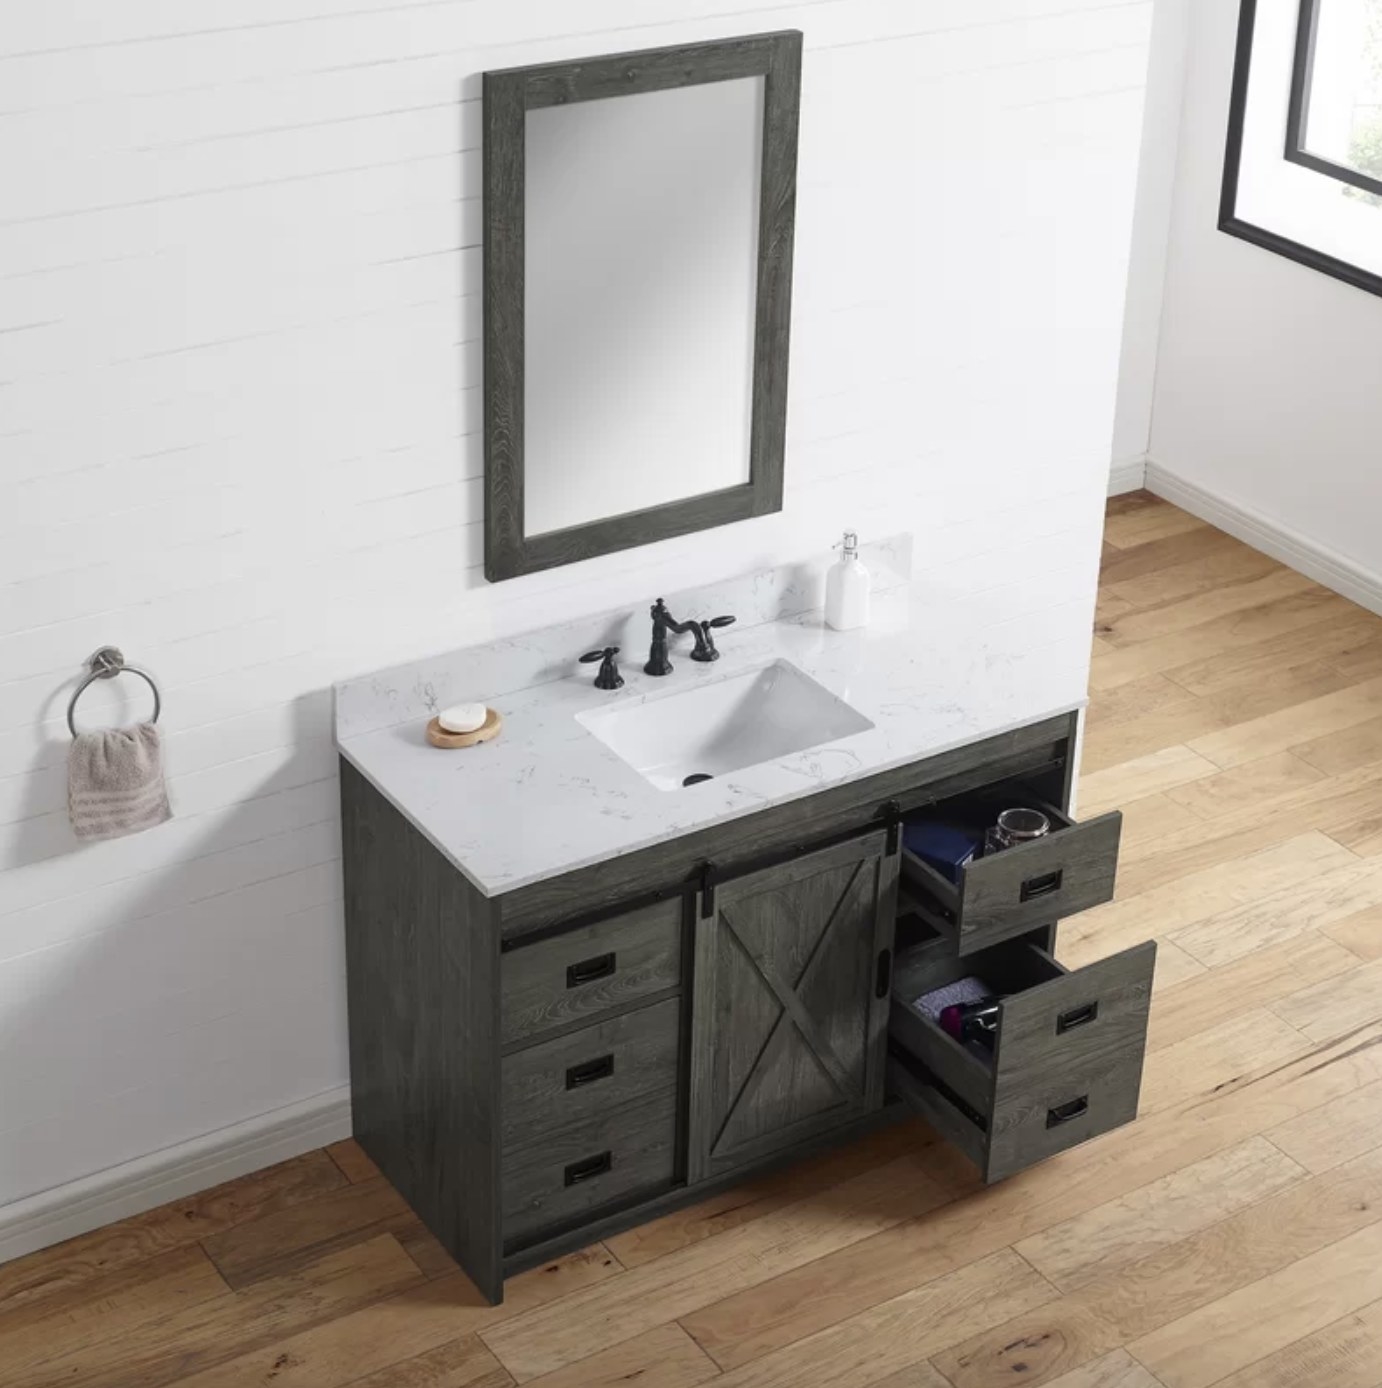 The sink has a marble styled white top and six charcoal grey drawers split between a barn-style door